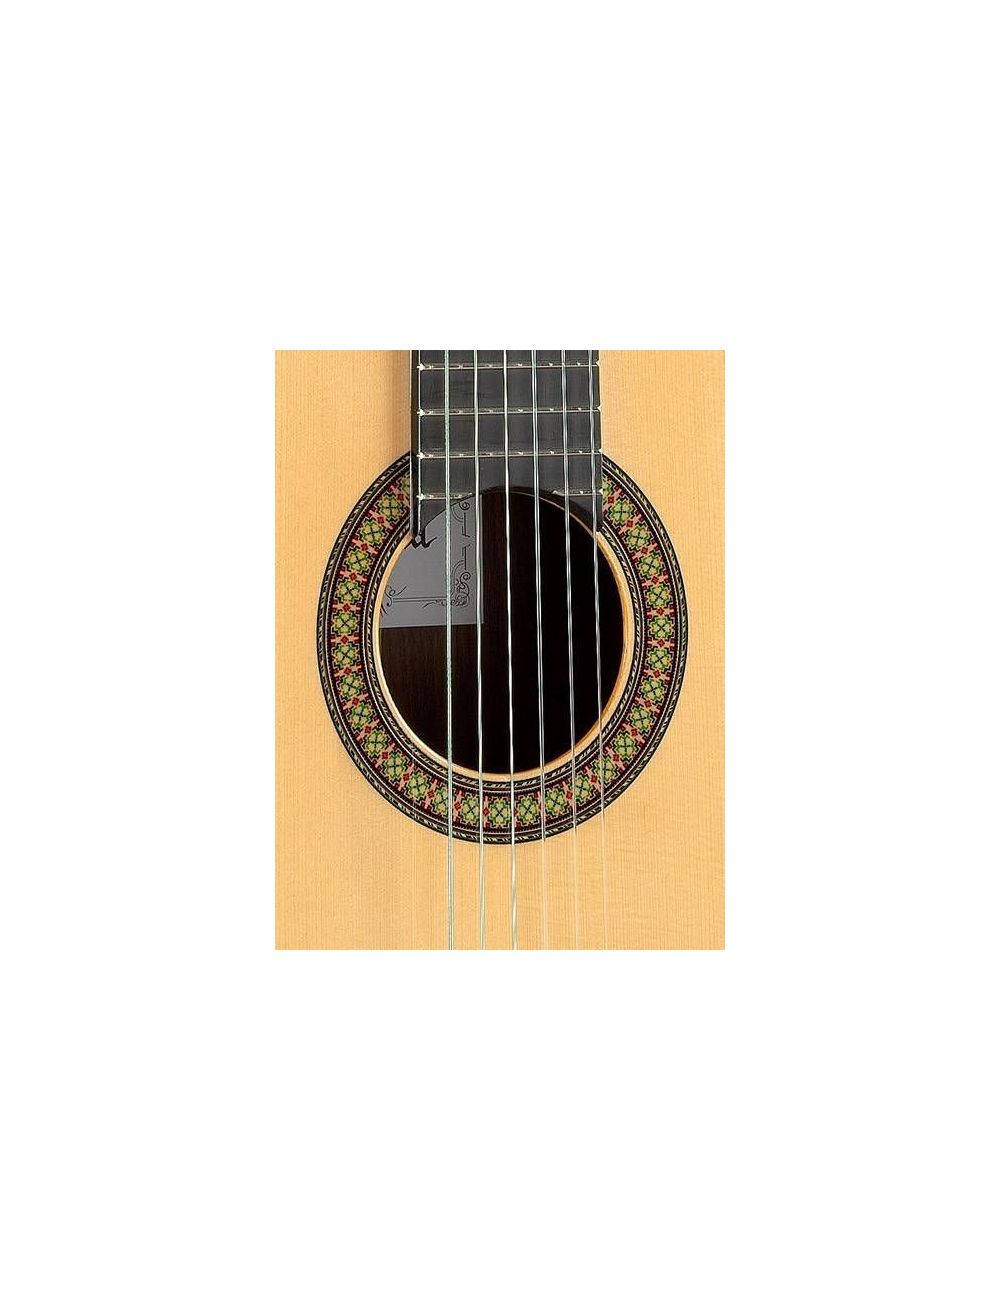 Alhambra 7PA Classical Guitar 7PA Concert Classical